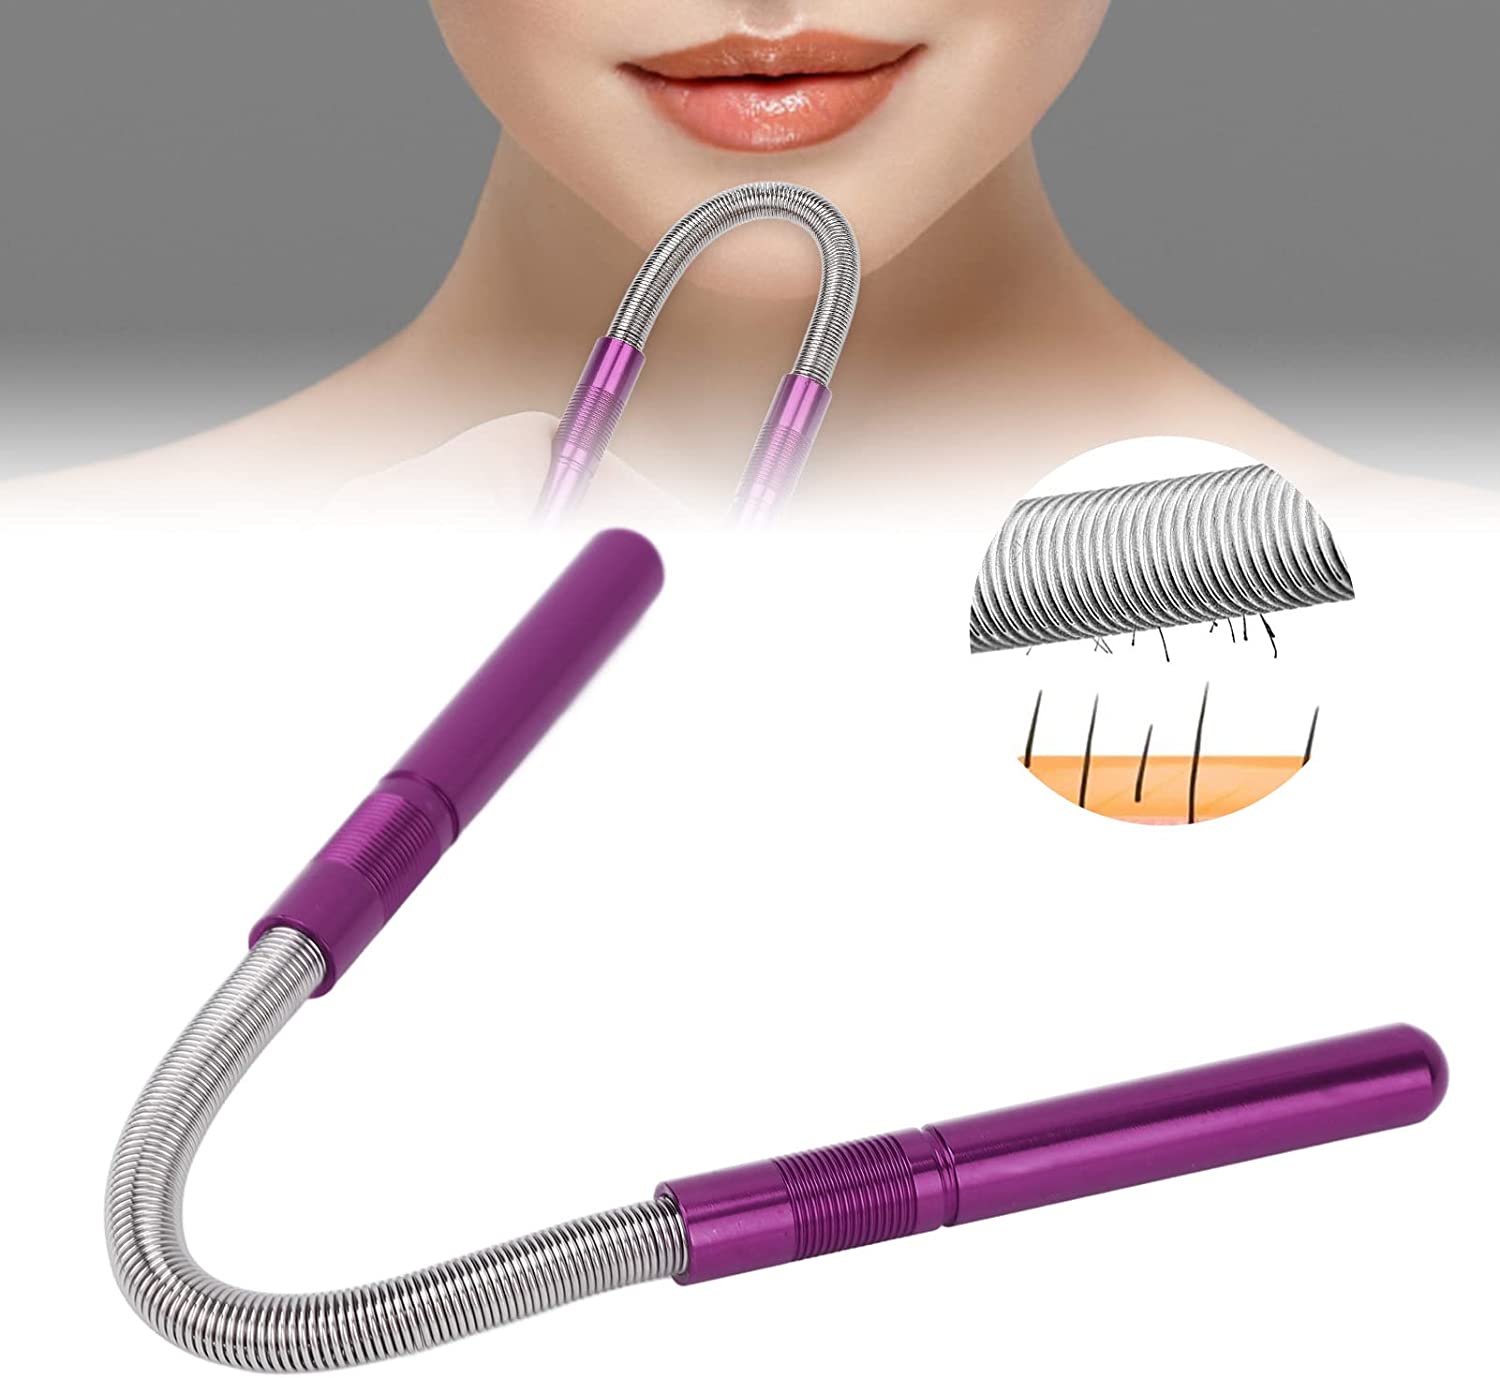 Facial Threading Spring Hair Remover Removal Stick Epilator Women Beauty  Tool Buy Facial Threading Spring Hair Remover Removal Stick Epilator Women  Beauty Tool Online Low Price in India on Snapdeal